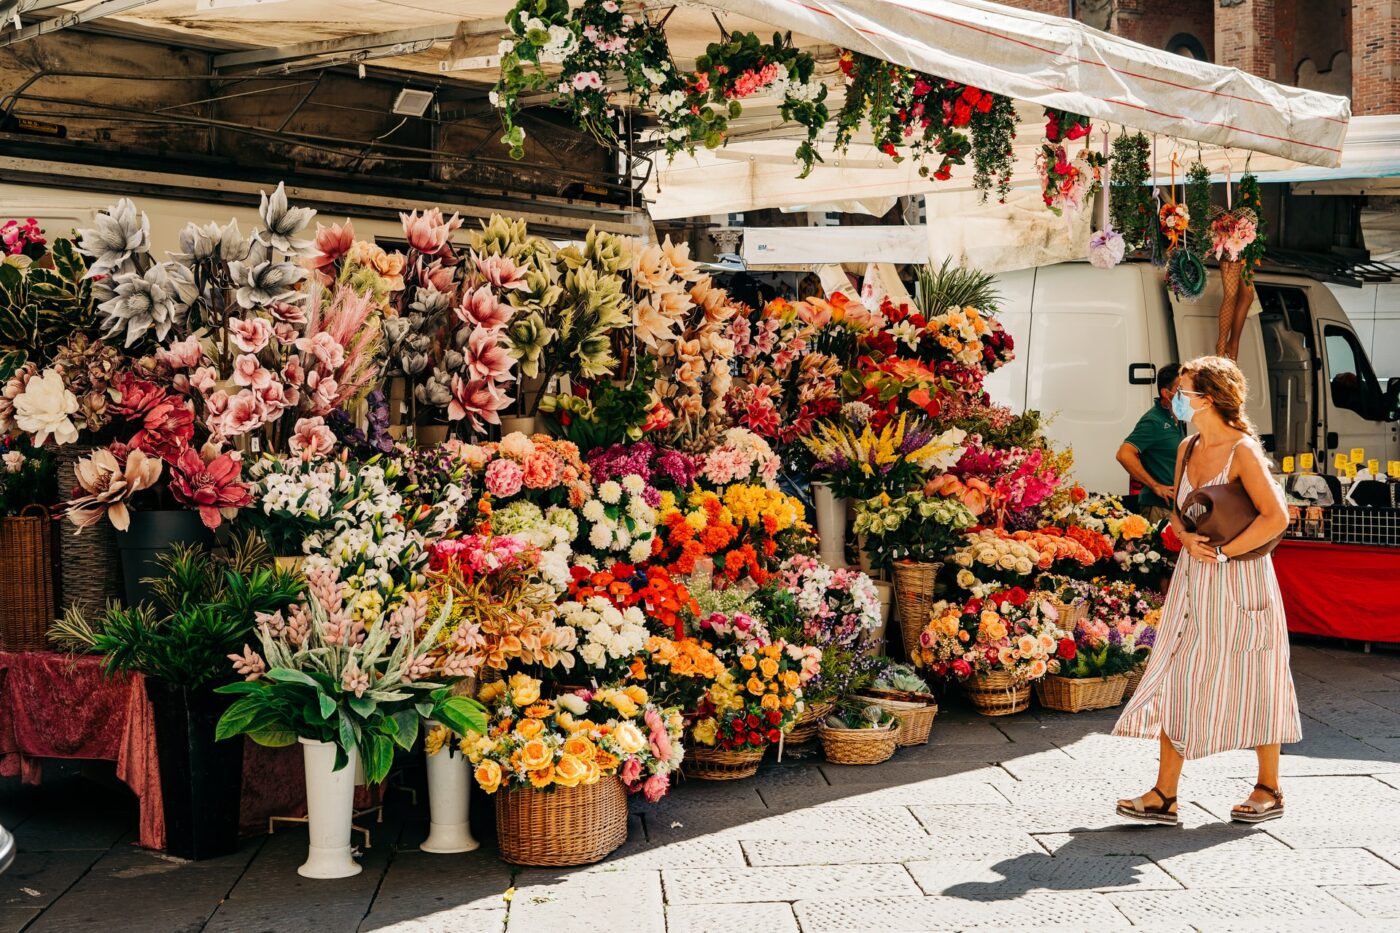 How Florists in Naples Can Benefit From Purchasing From BFS